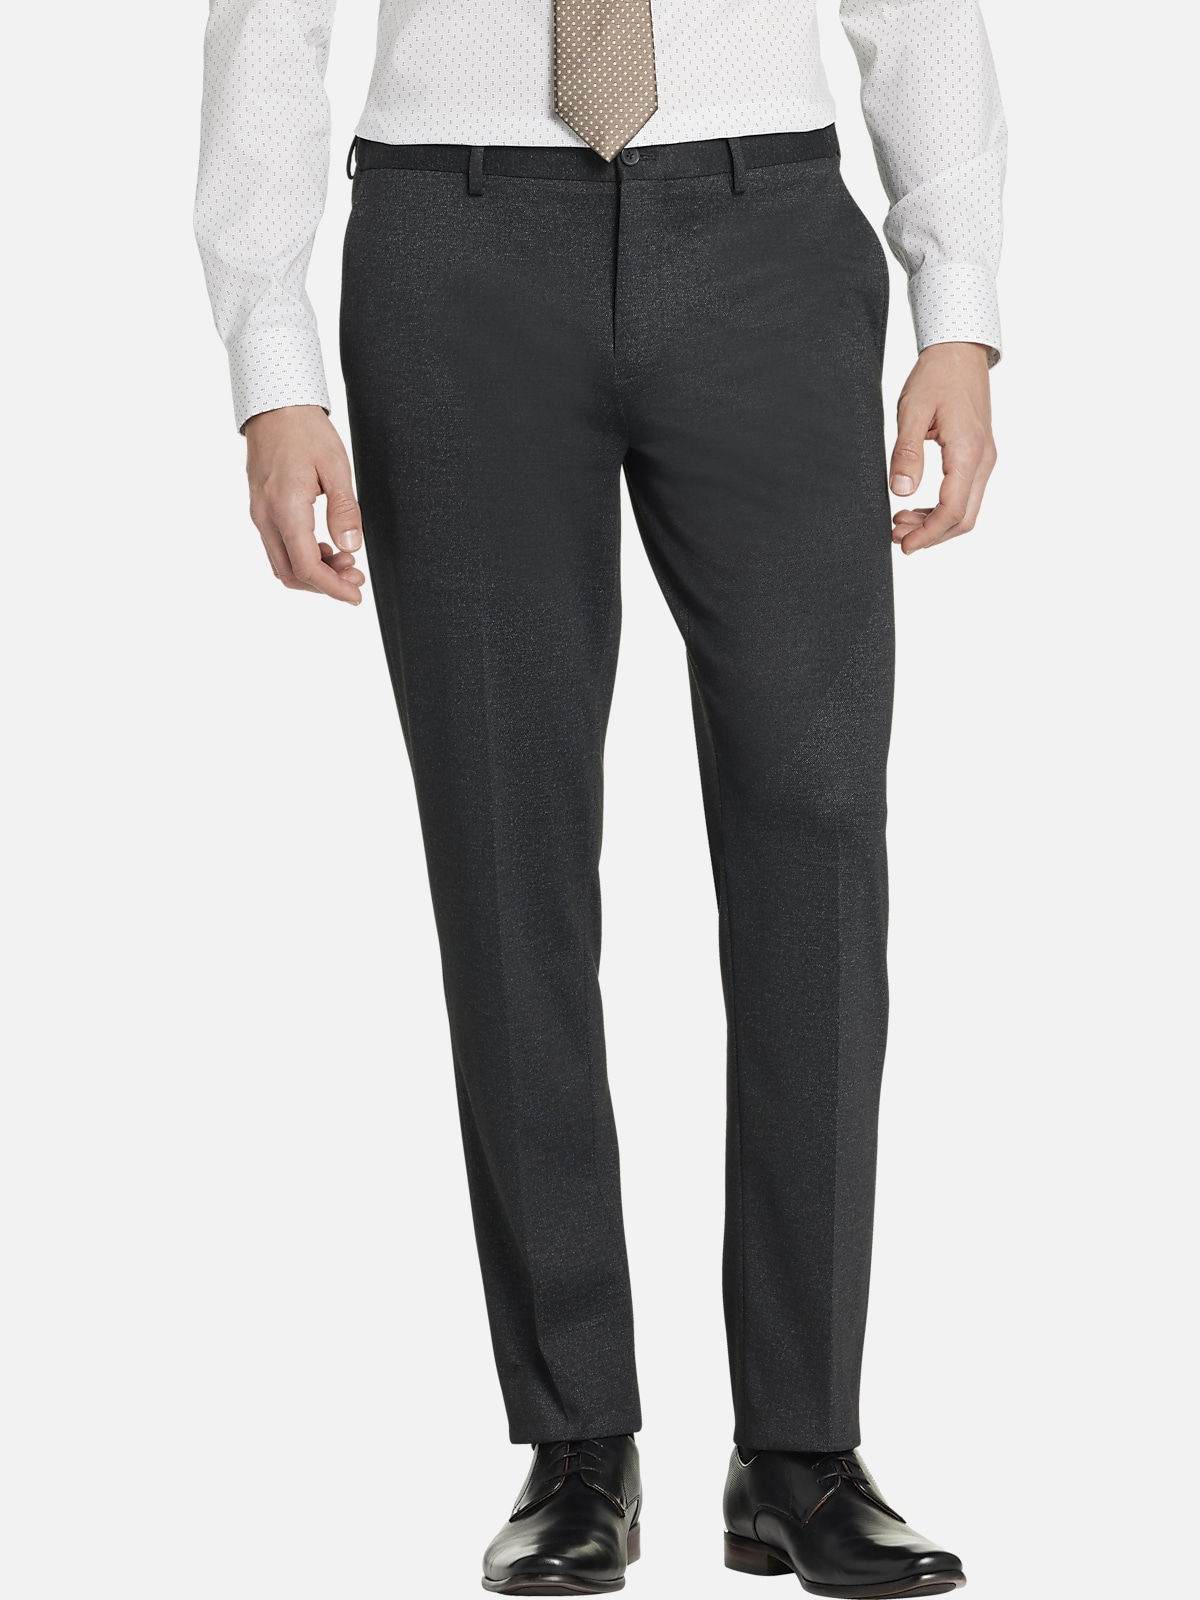 Awearness Kenneth Cole Slim Fit Suit Separates Pants | All Clearance ...